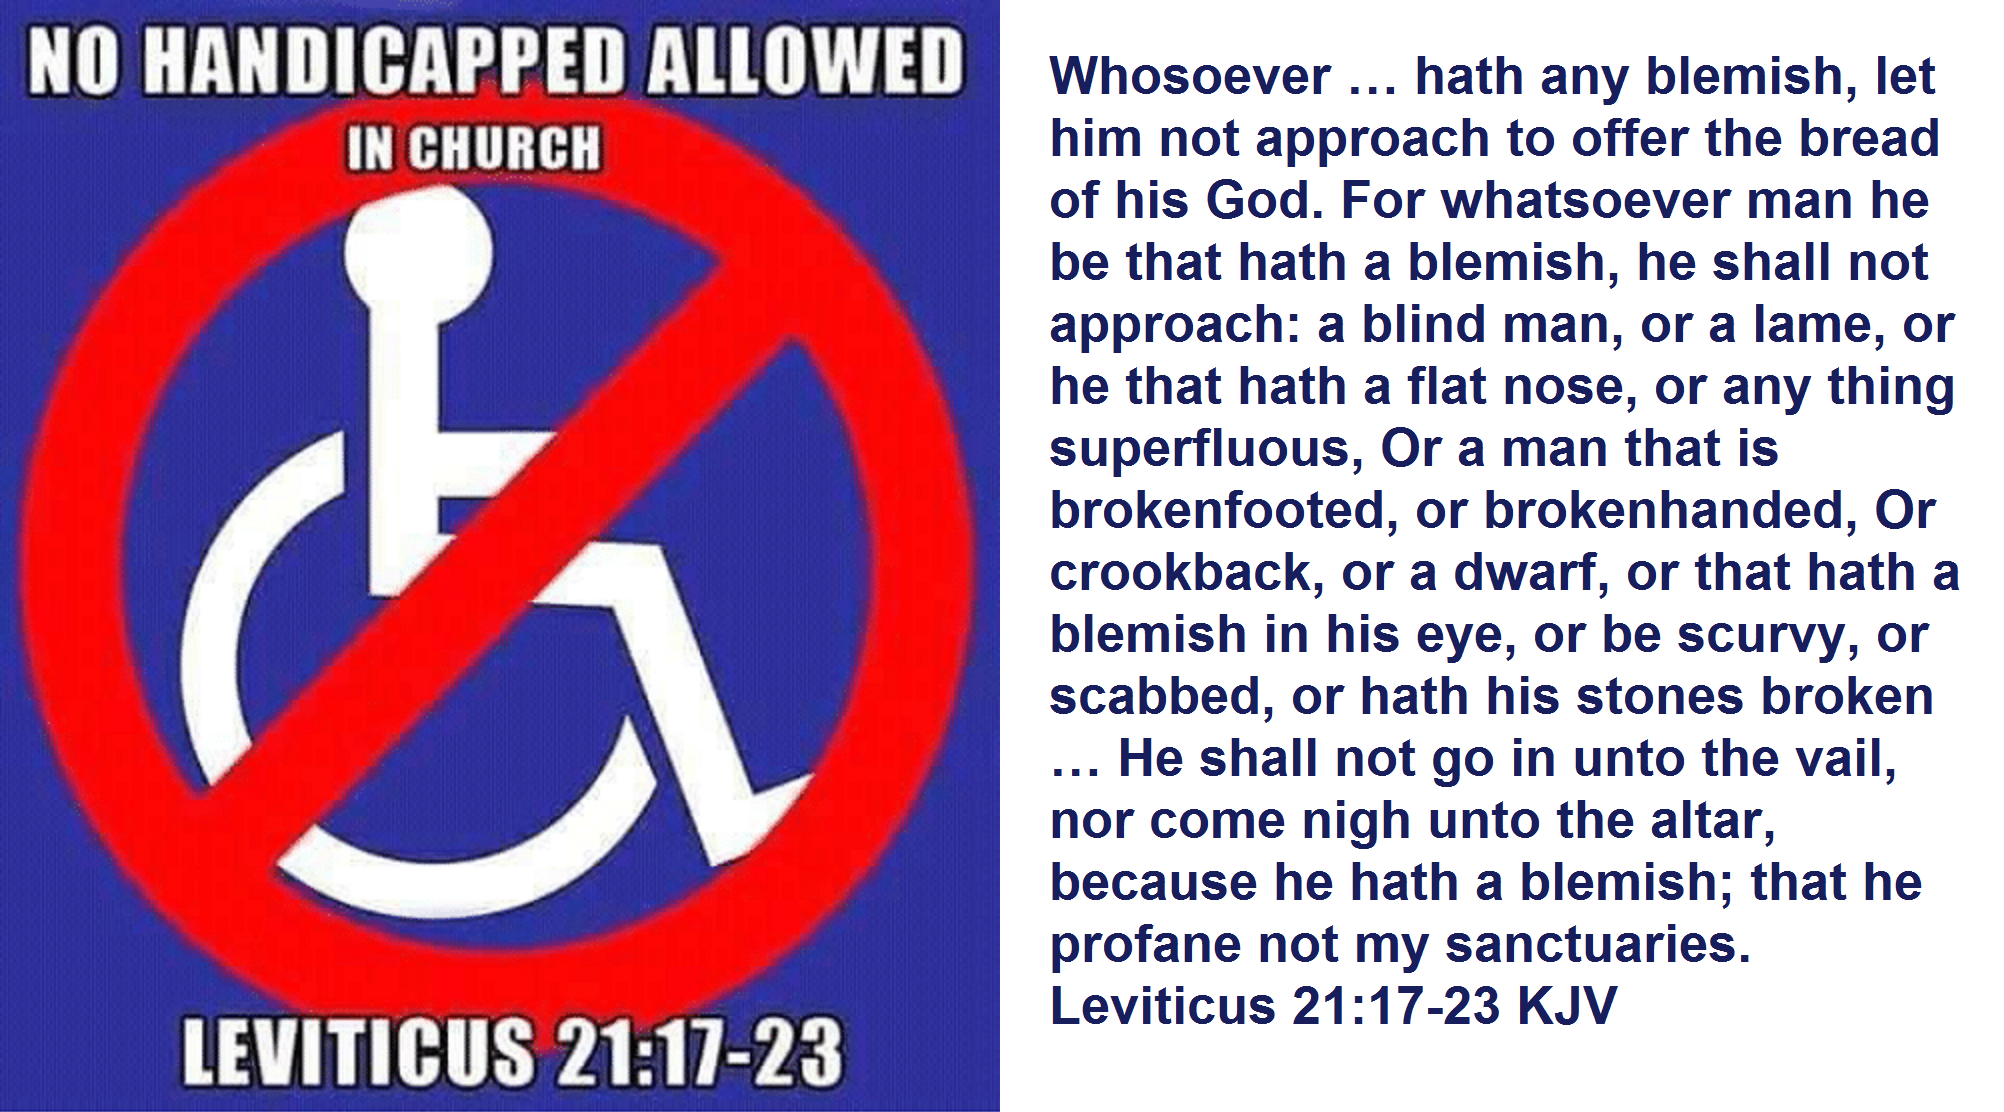 Whosoever … hath any blemish, let him not approach to offer the bread of his God. For whatsoever man he be that hath a blemish, he shall not approach: a blind man, or a lame, or he that hath a flat nose, or any thing superfluous, Or a man that is brokenfooted, or brokenhanded, Or crookback, or a dwarf, or that hath a blemish in his eye, or be scurvy, or scabbed, or hath his stones broken … He shall not go in unto the vail, nor come nigh unto the altar, because he hath a blemish; that he profane not my sanctuaries. Leviticus 21:17-23 KJV